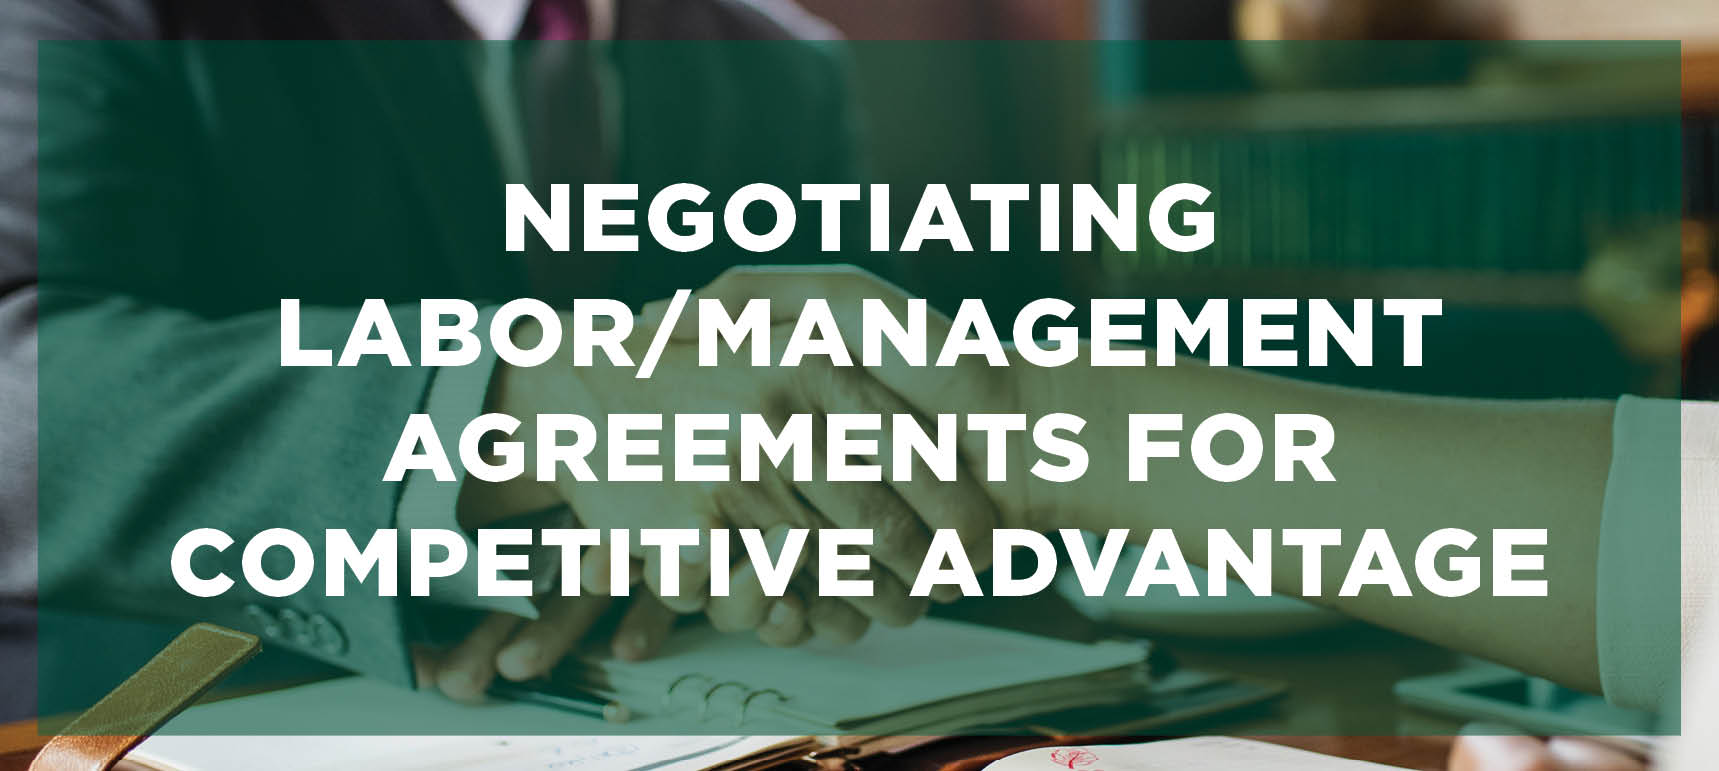 Learn more about the Negotiating Labor/Management Agreements for Competitive Advantage program.